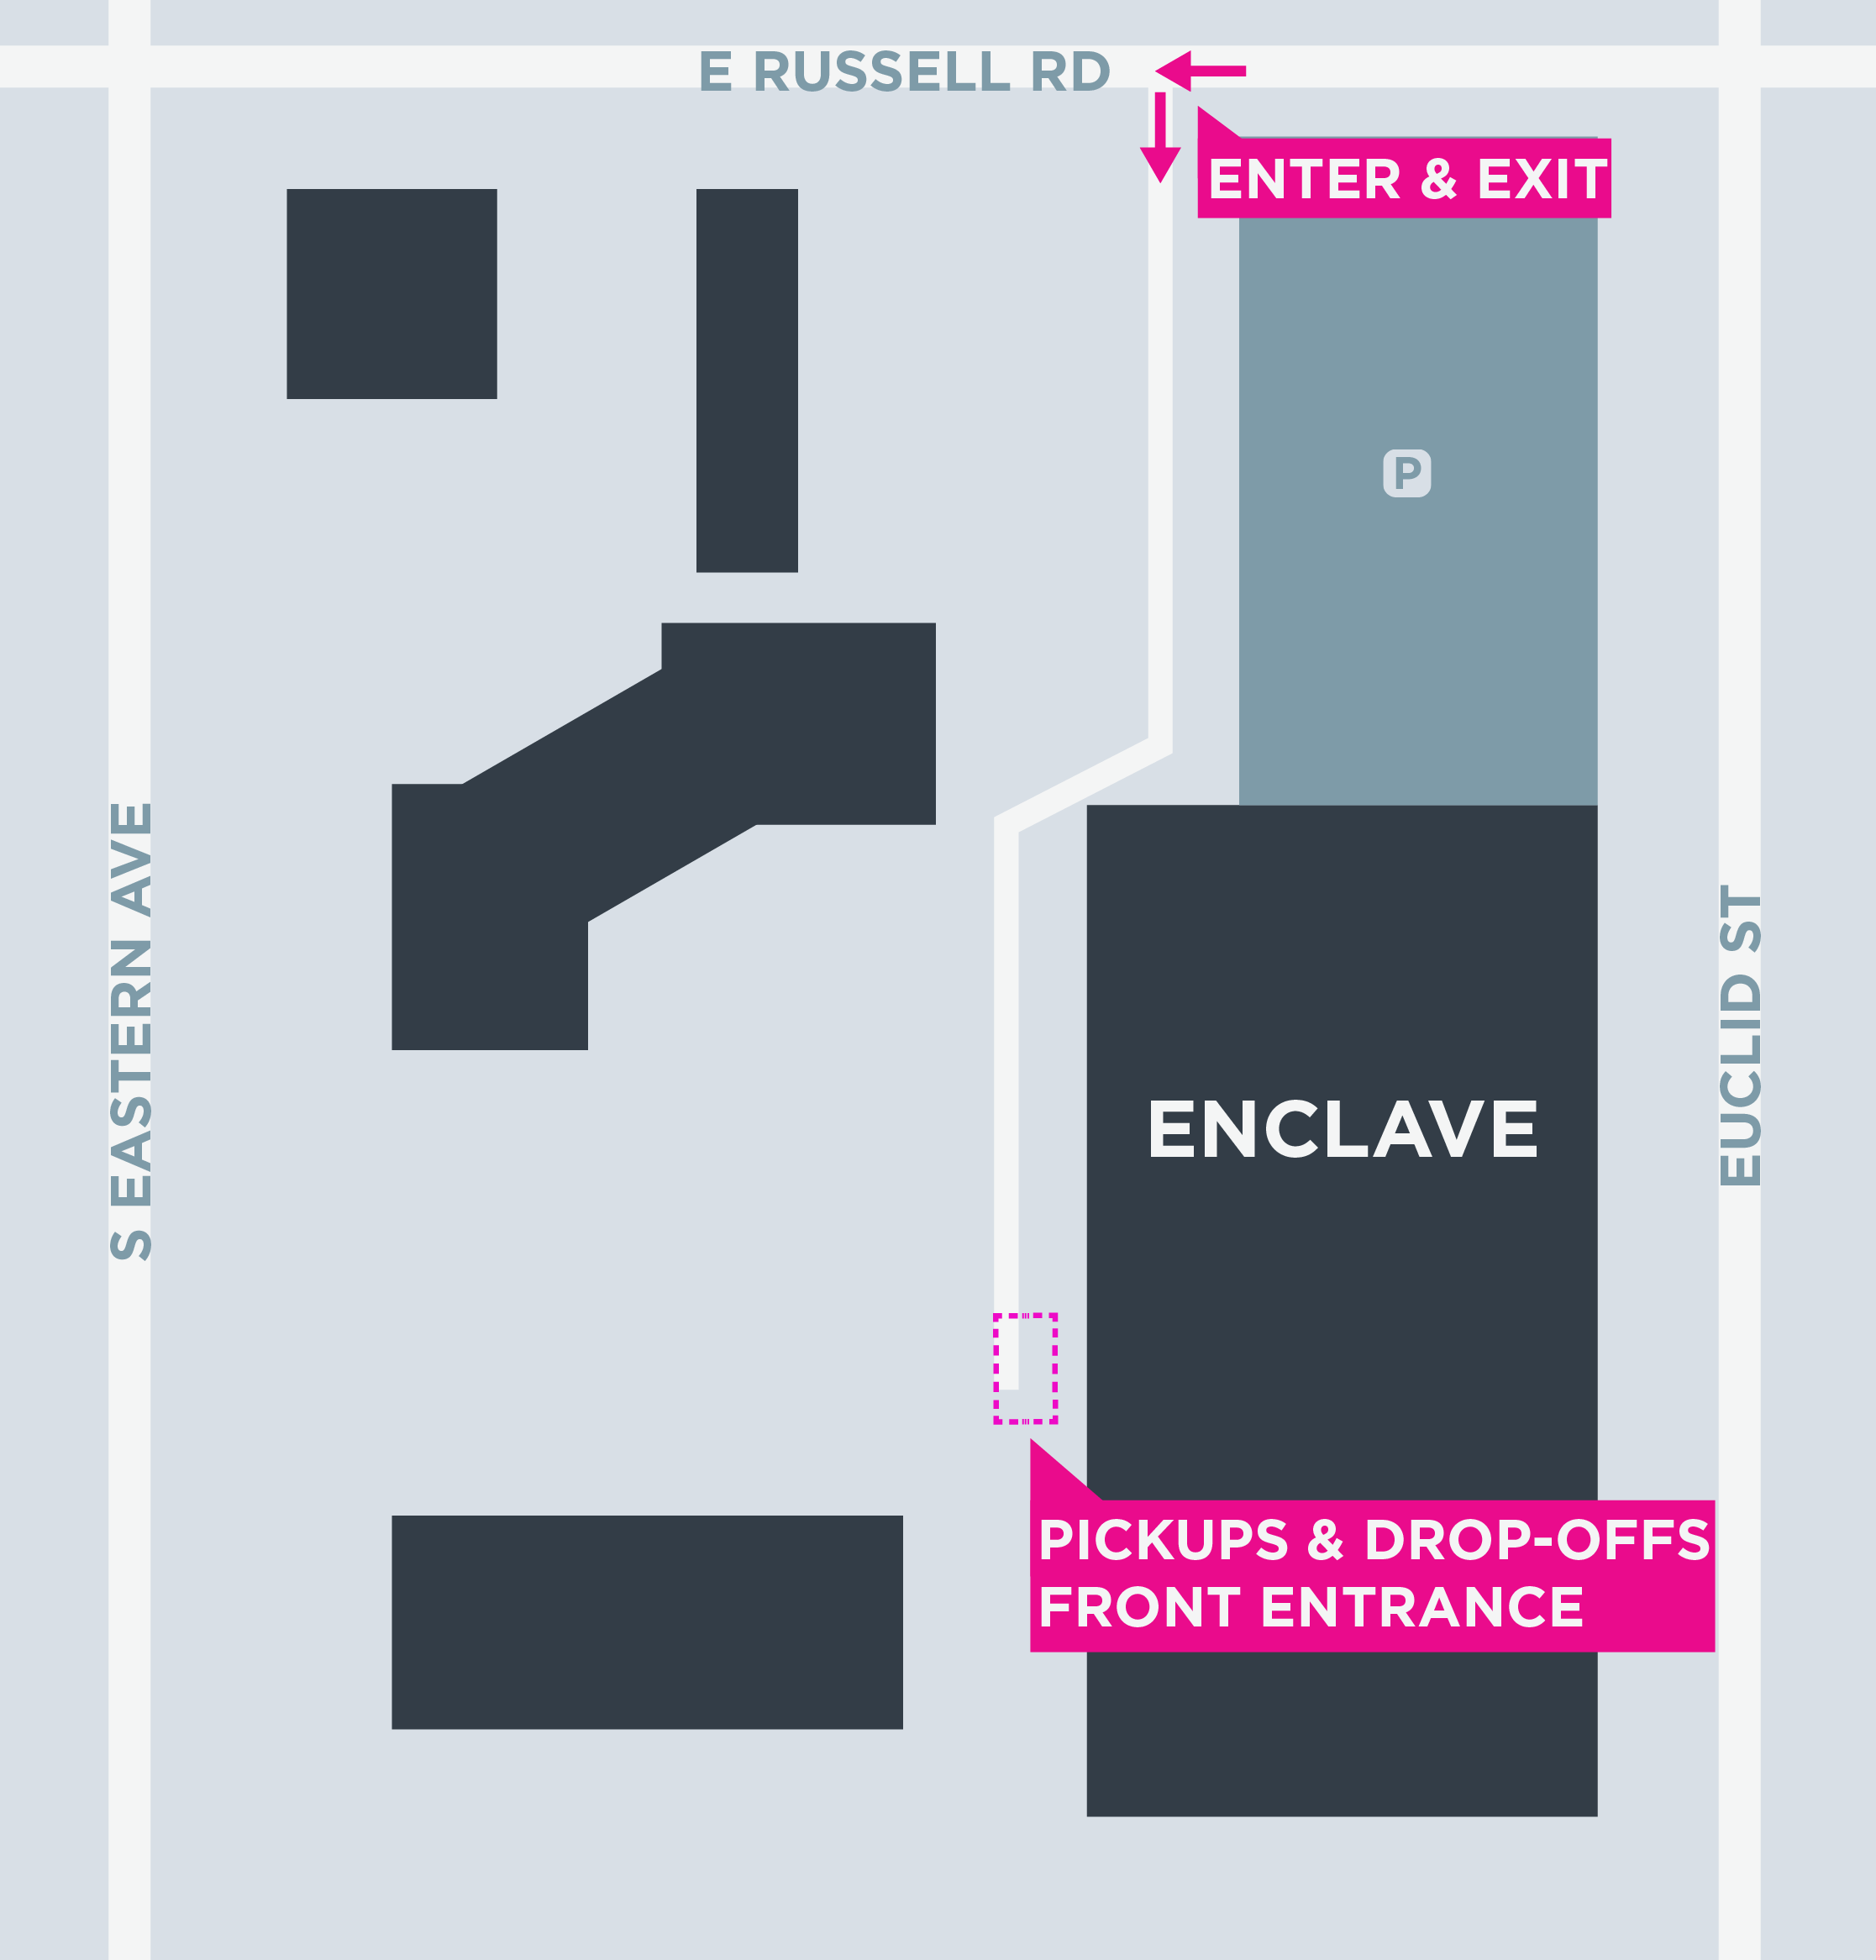 This image shows a map of the Enclave, including pickup and dropoff areas.